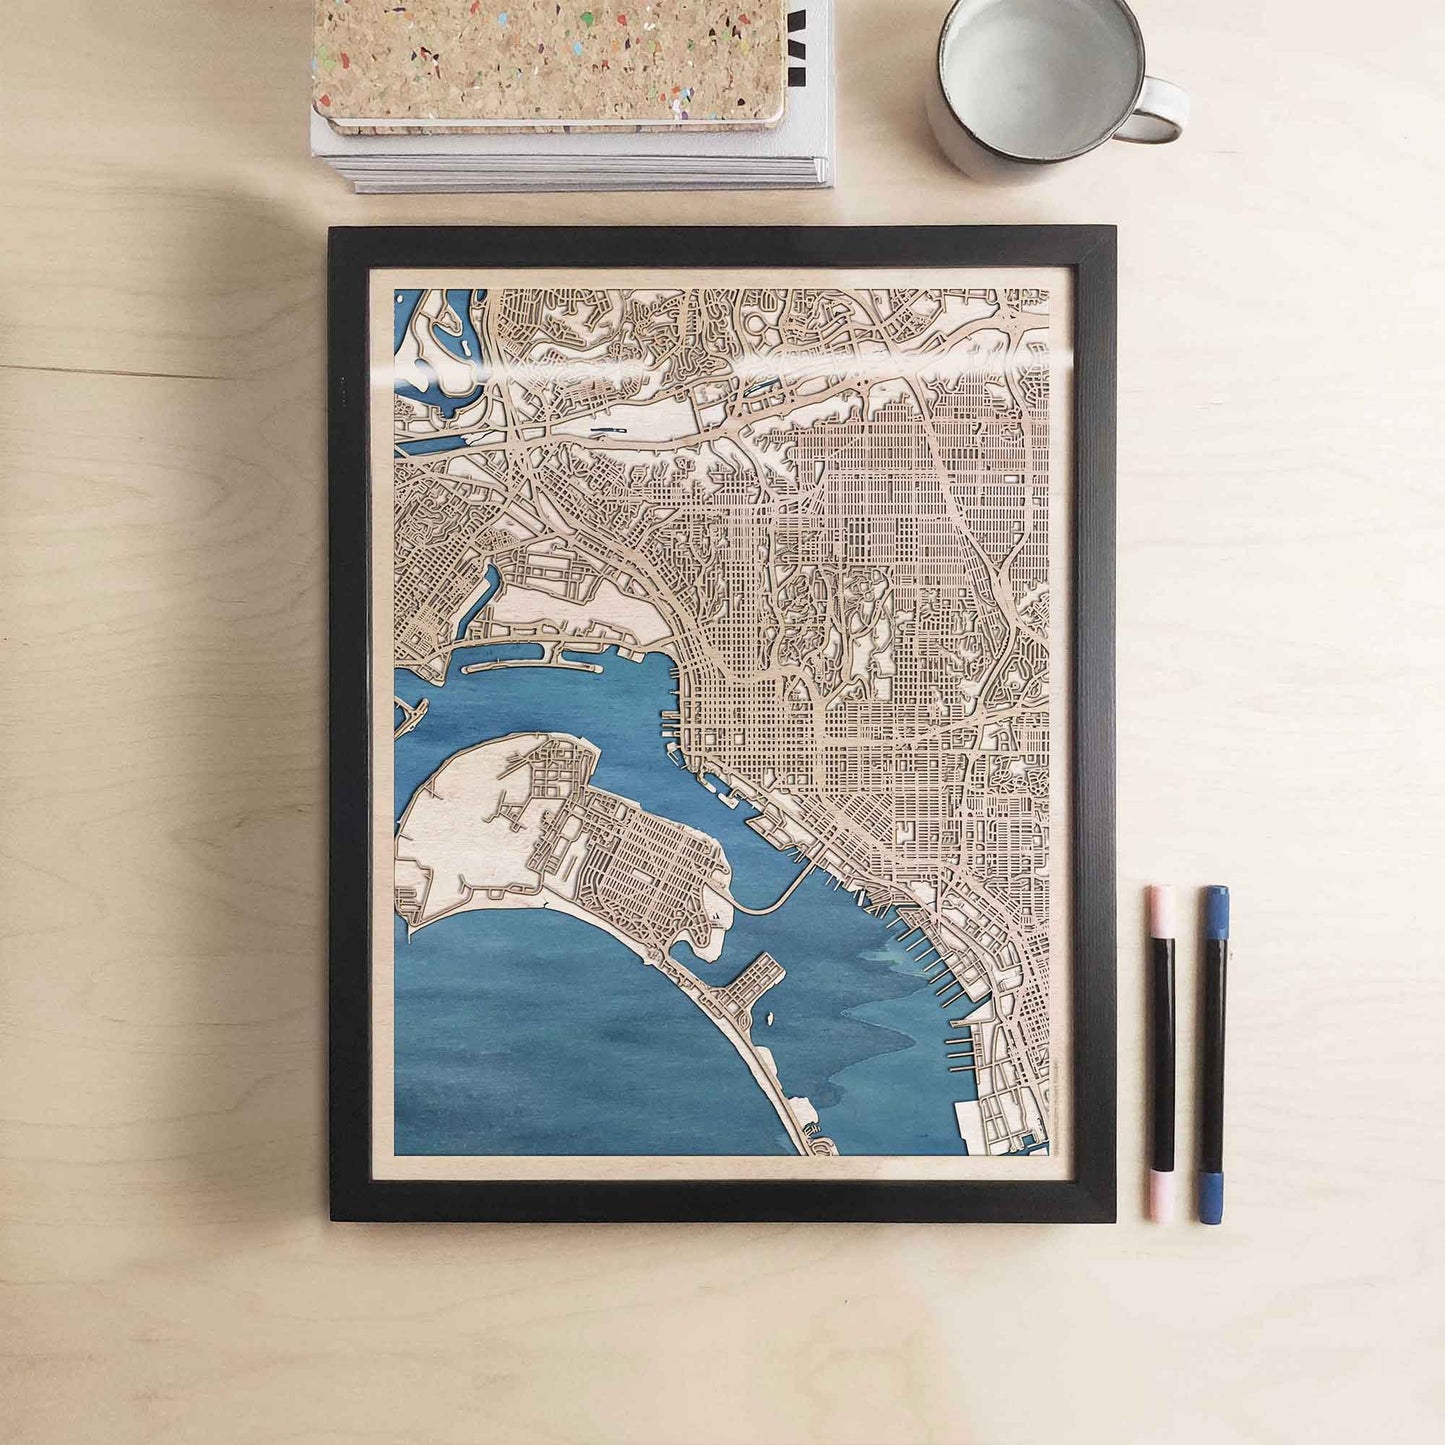 San Diego Wooden Map by CityWood - Custom Wood Map Art - Unique Laser Cut Engraved - Anniversary Gift